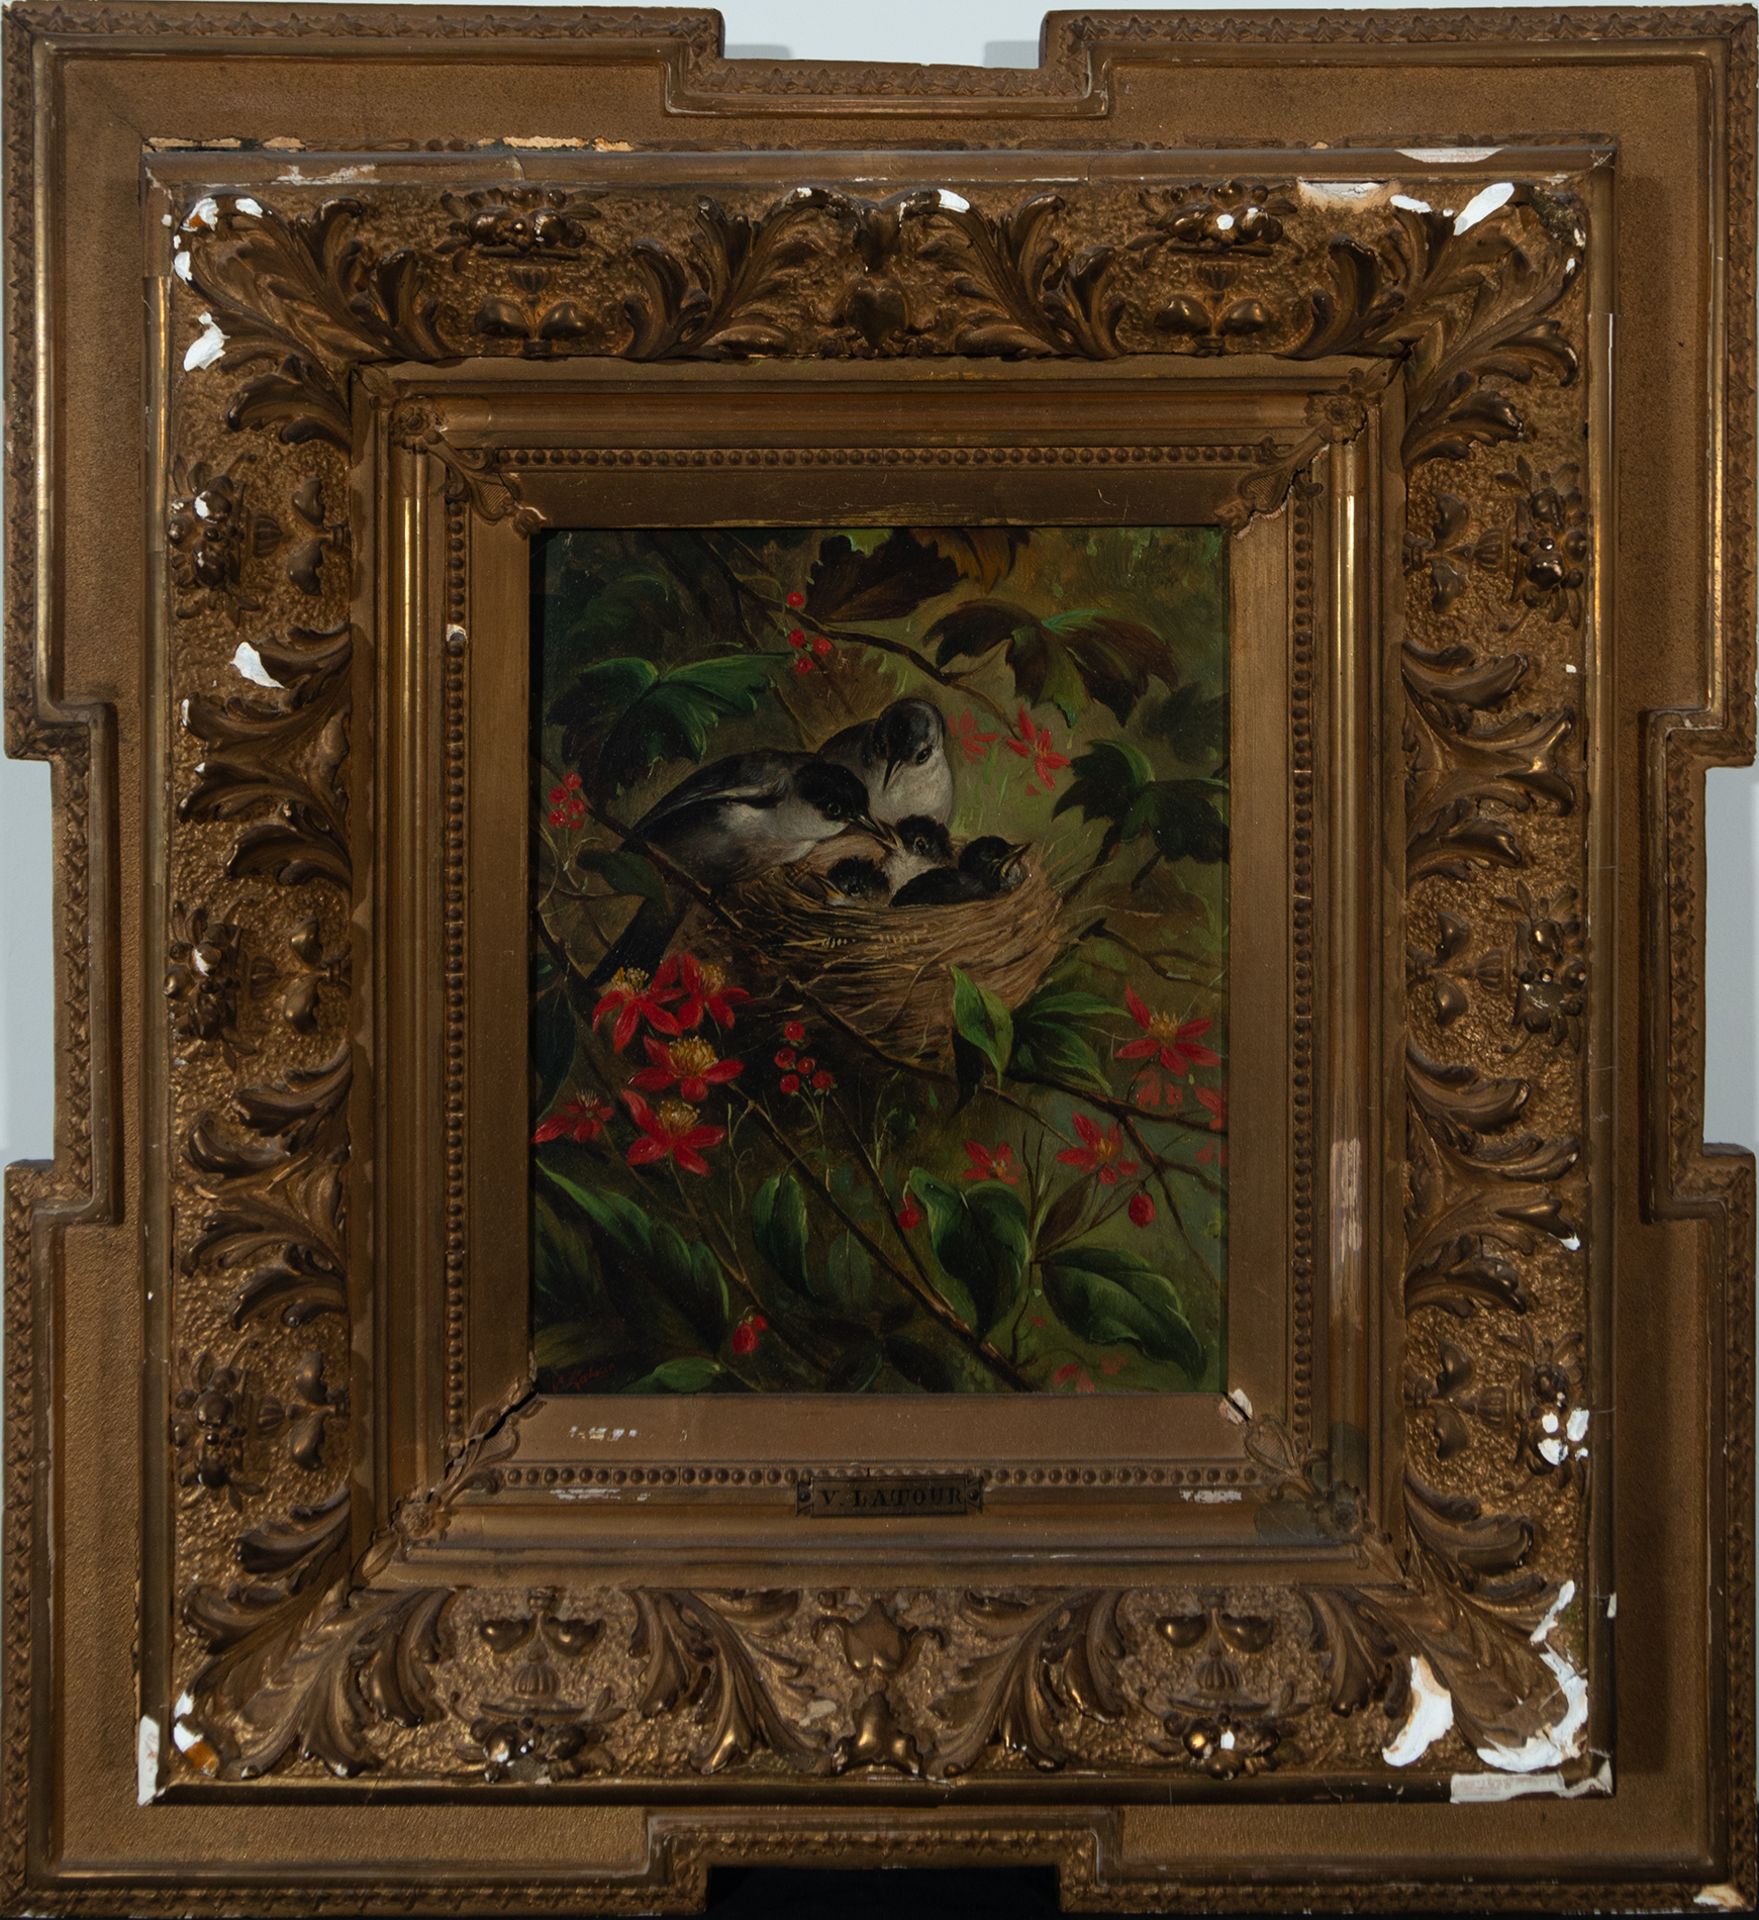 Pair of Oils on panel of Birds in a Nest, French school of the 19th century, signed V. Latour - Image 2 of 10